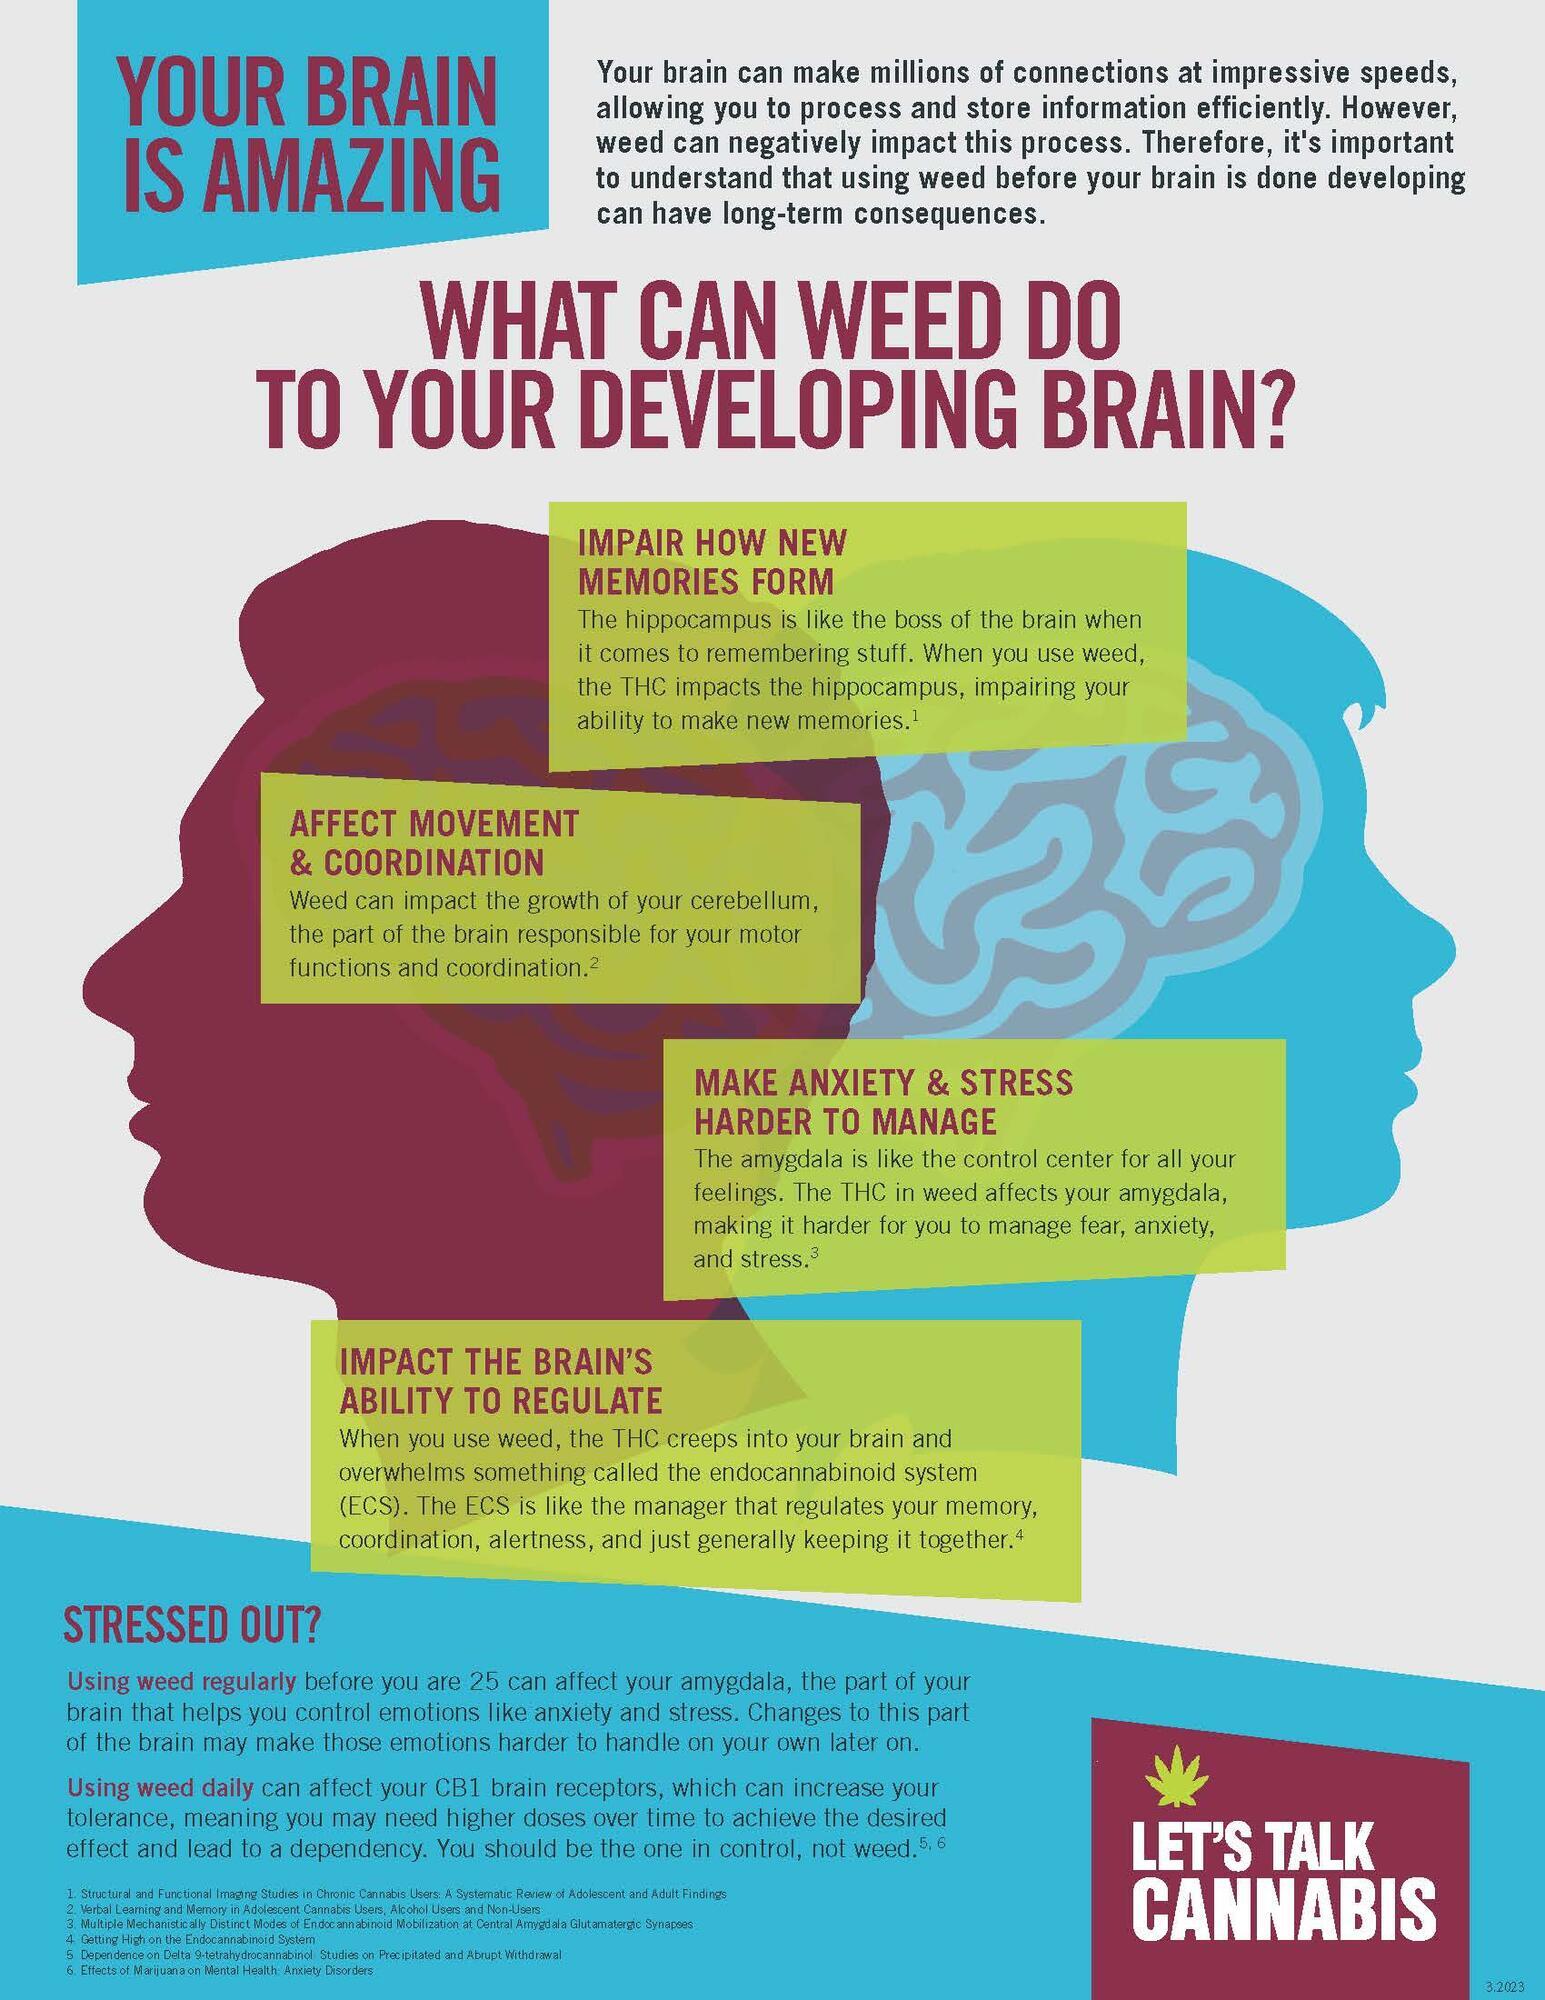 weed can impact your developing brain